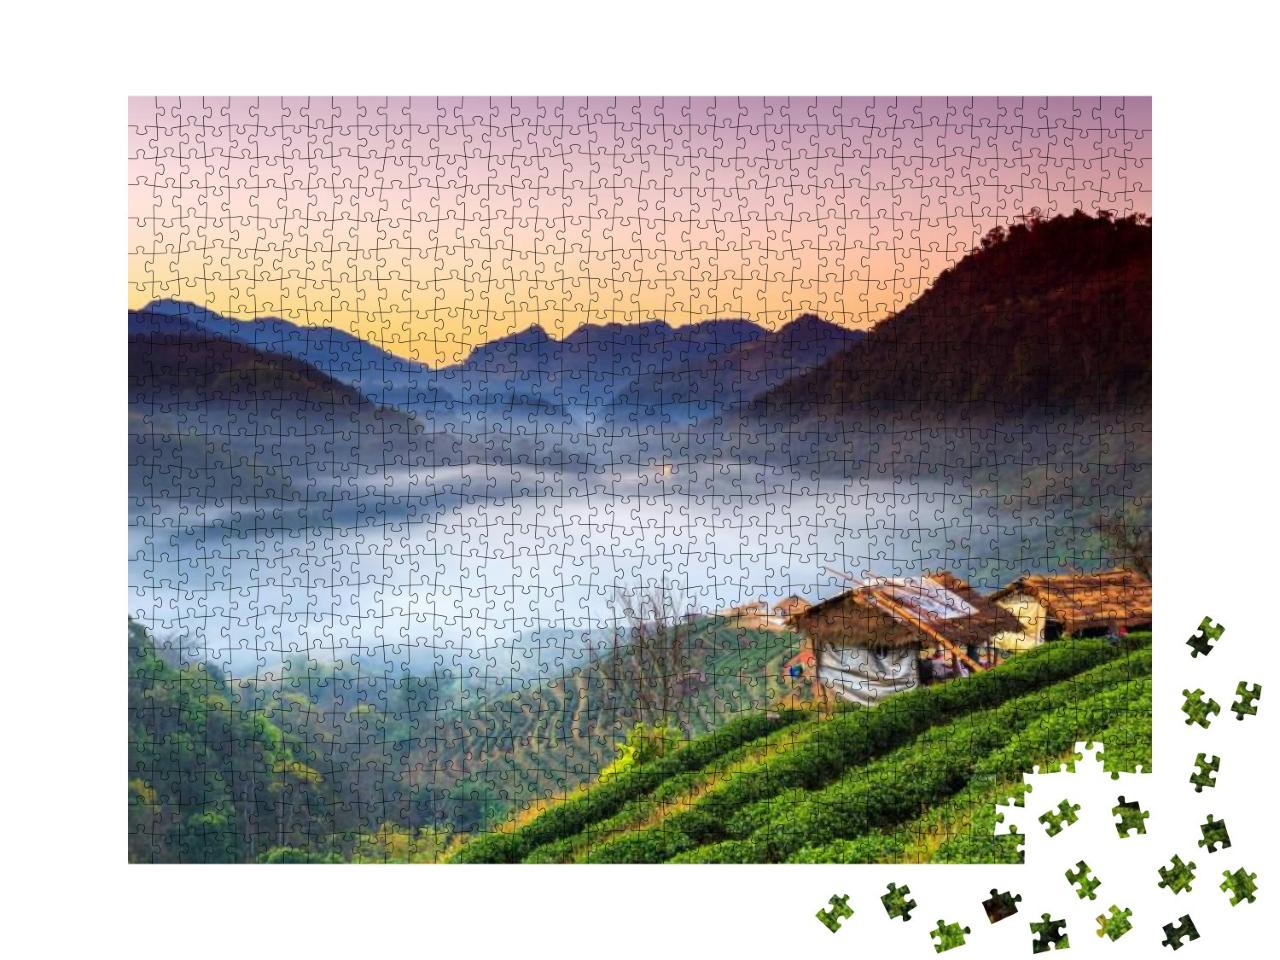 Sunrise & Foggy Mountain View of Tea Plantation At Doi An... Jigsaw Puzzle with 1000 pieces